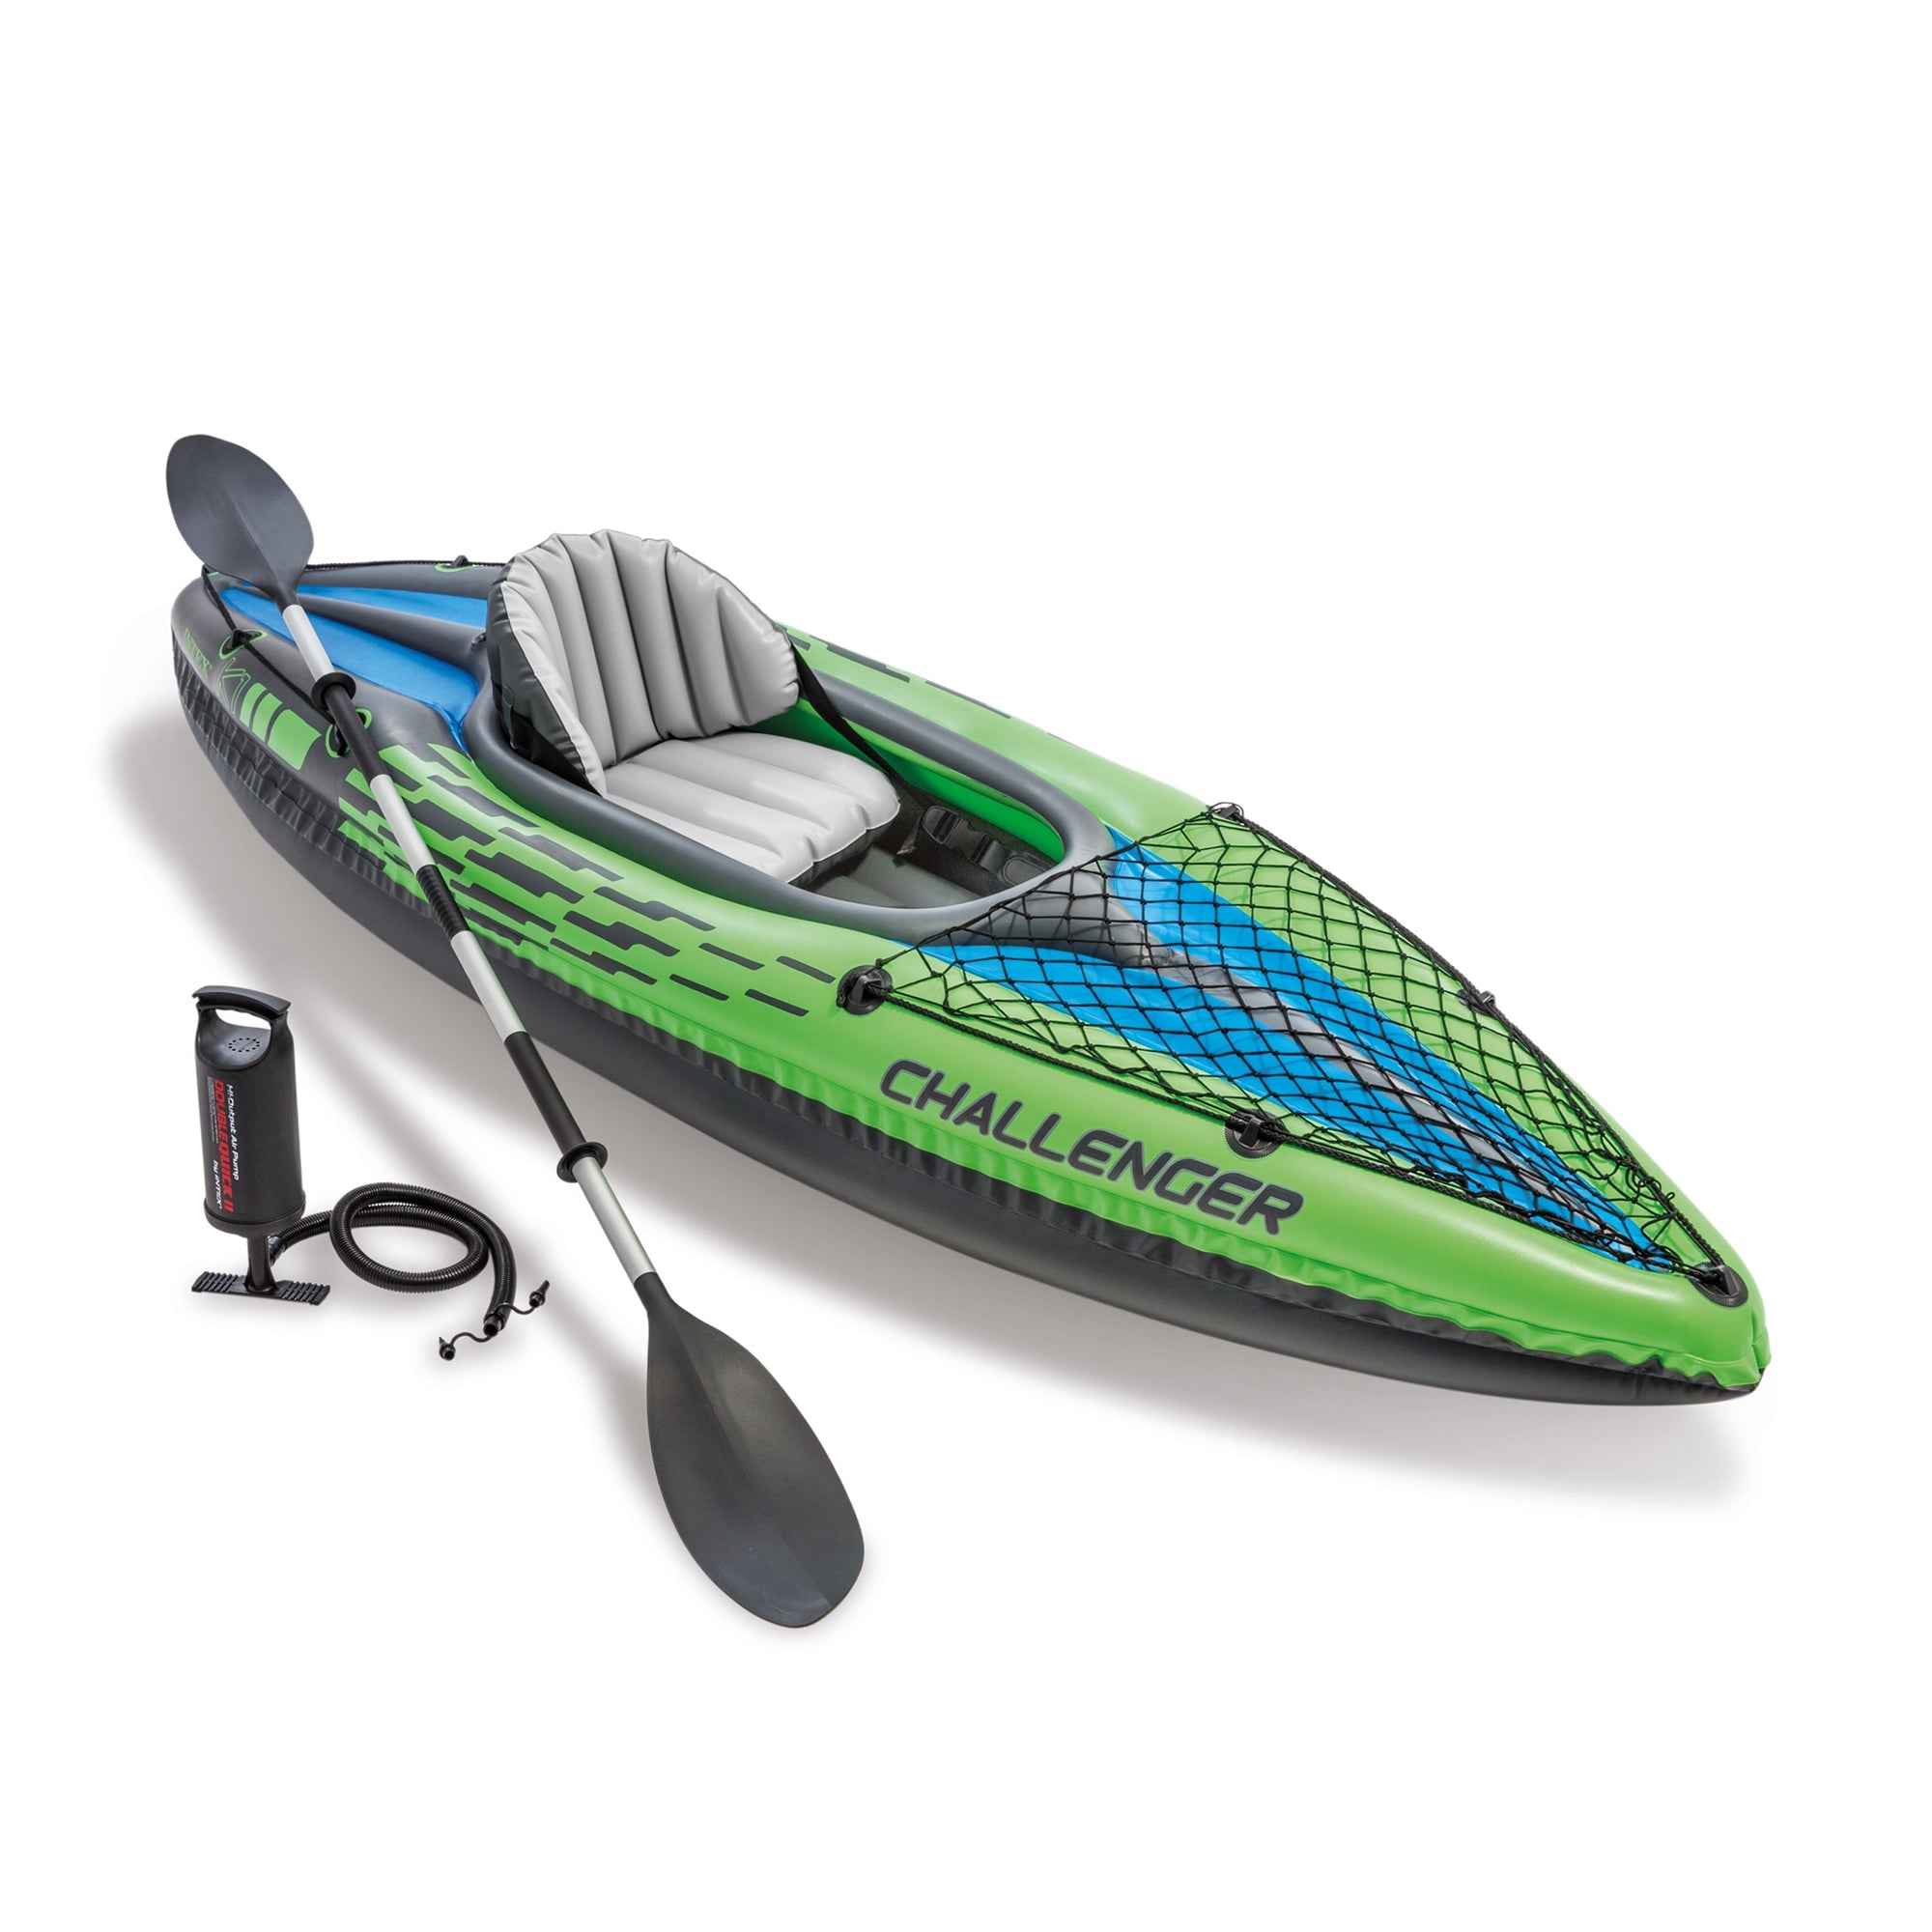 Intex-Challenger-K1-Inflatable-Single-Person-Kayak-Set-and-Accessory-Kit-w/-Pump-Kayaks